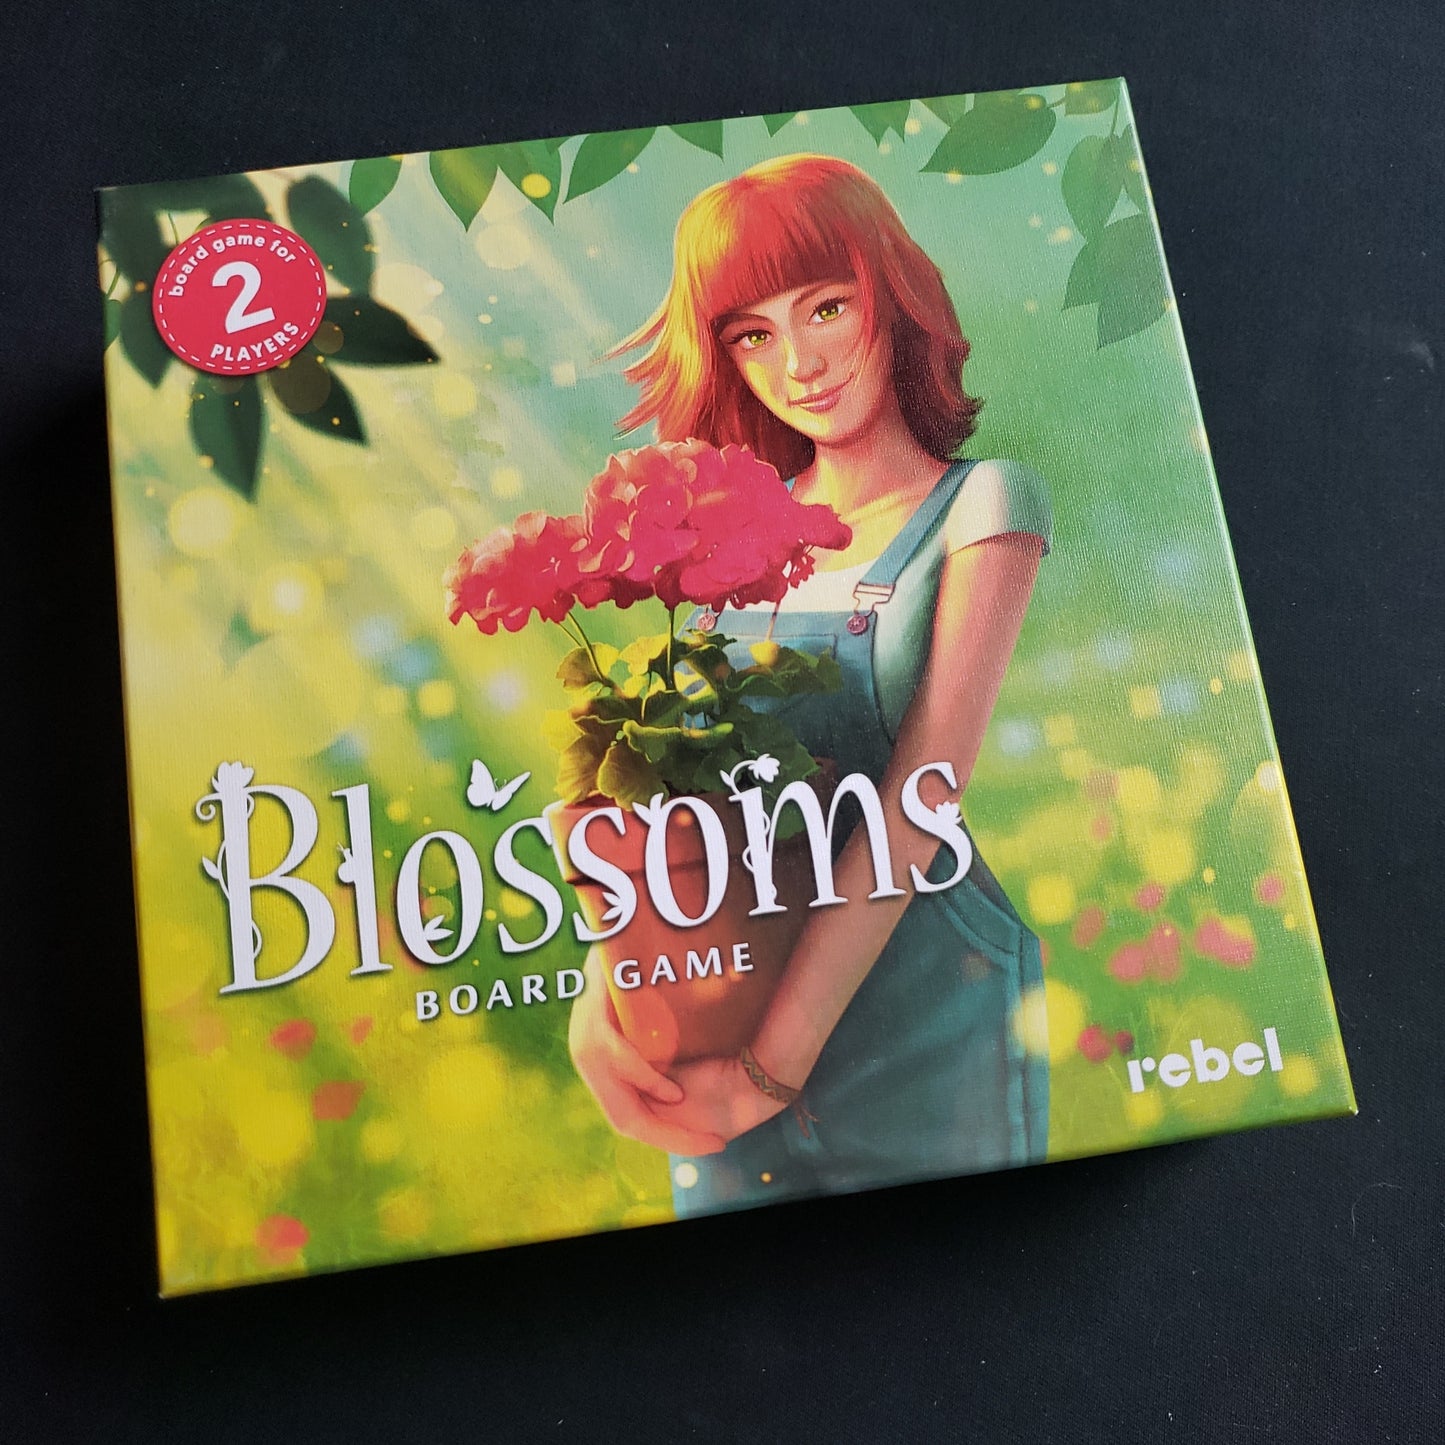 Image shows the front cover of the box of the Blossoms card game